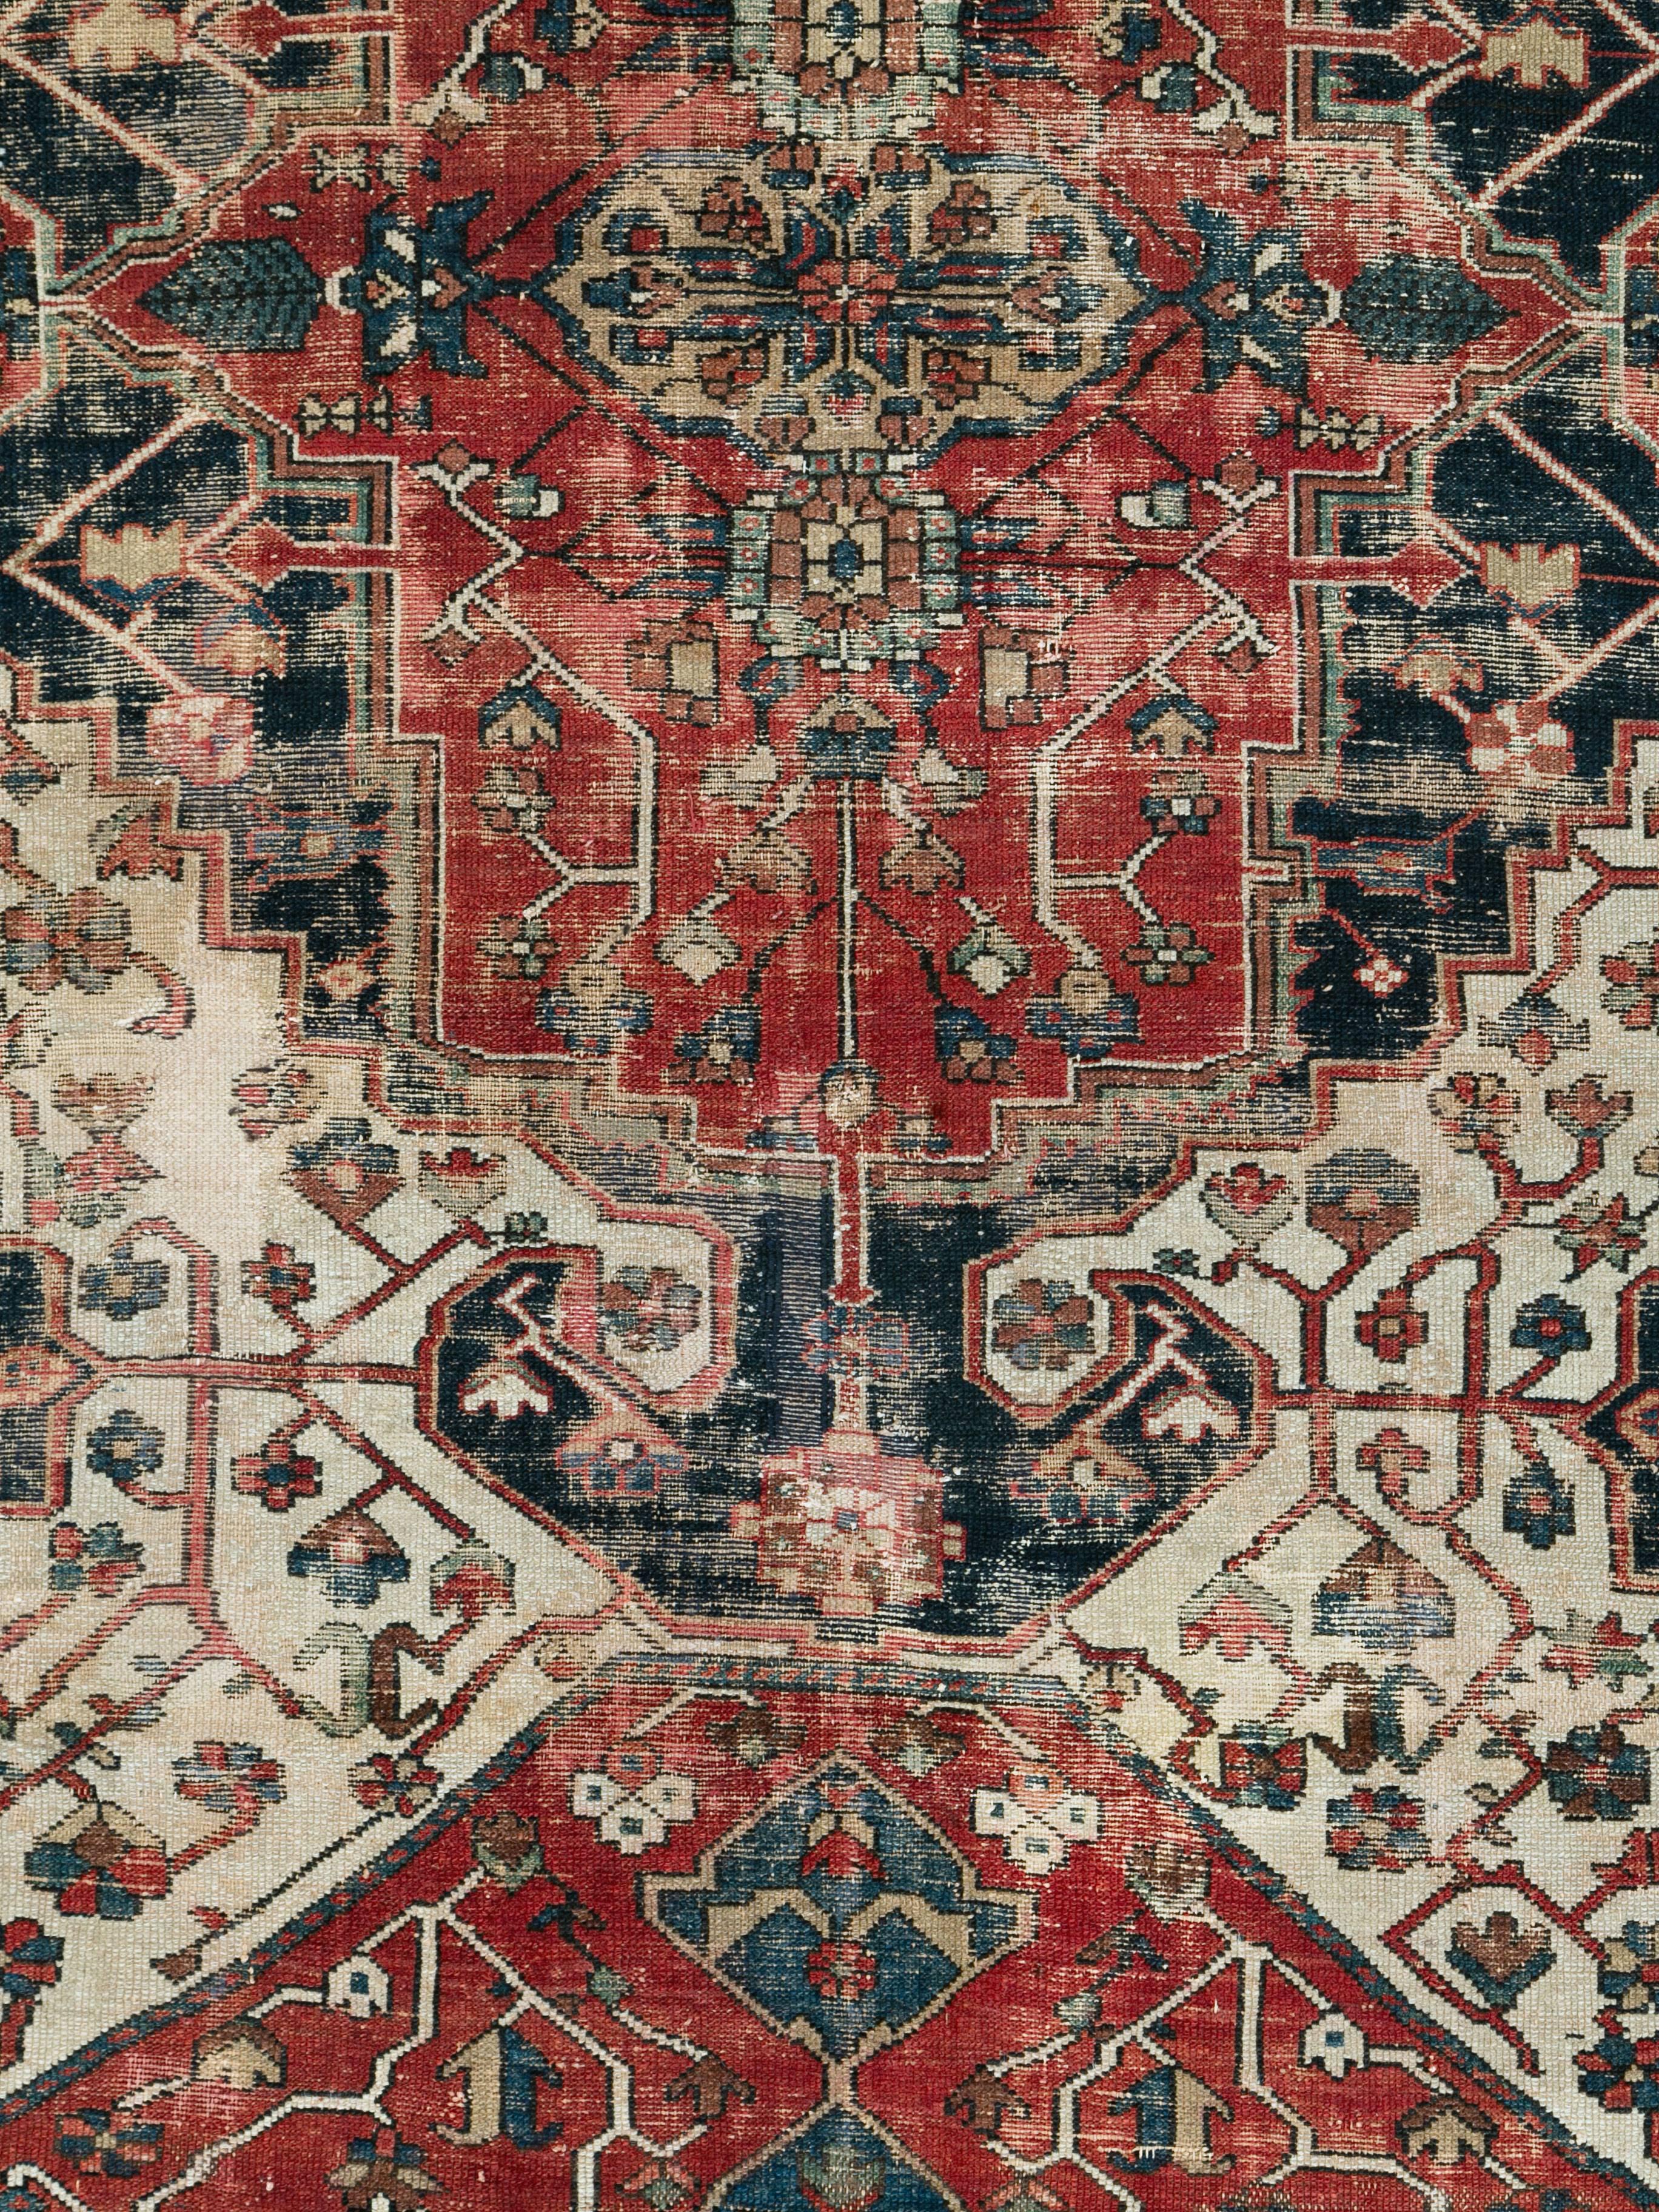 An antique Persian Bakhtiari rug from the early 20th century with a naturally distressed appeal.